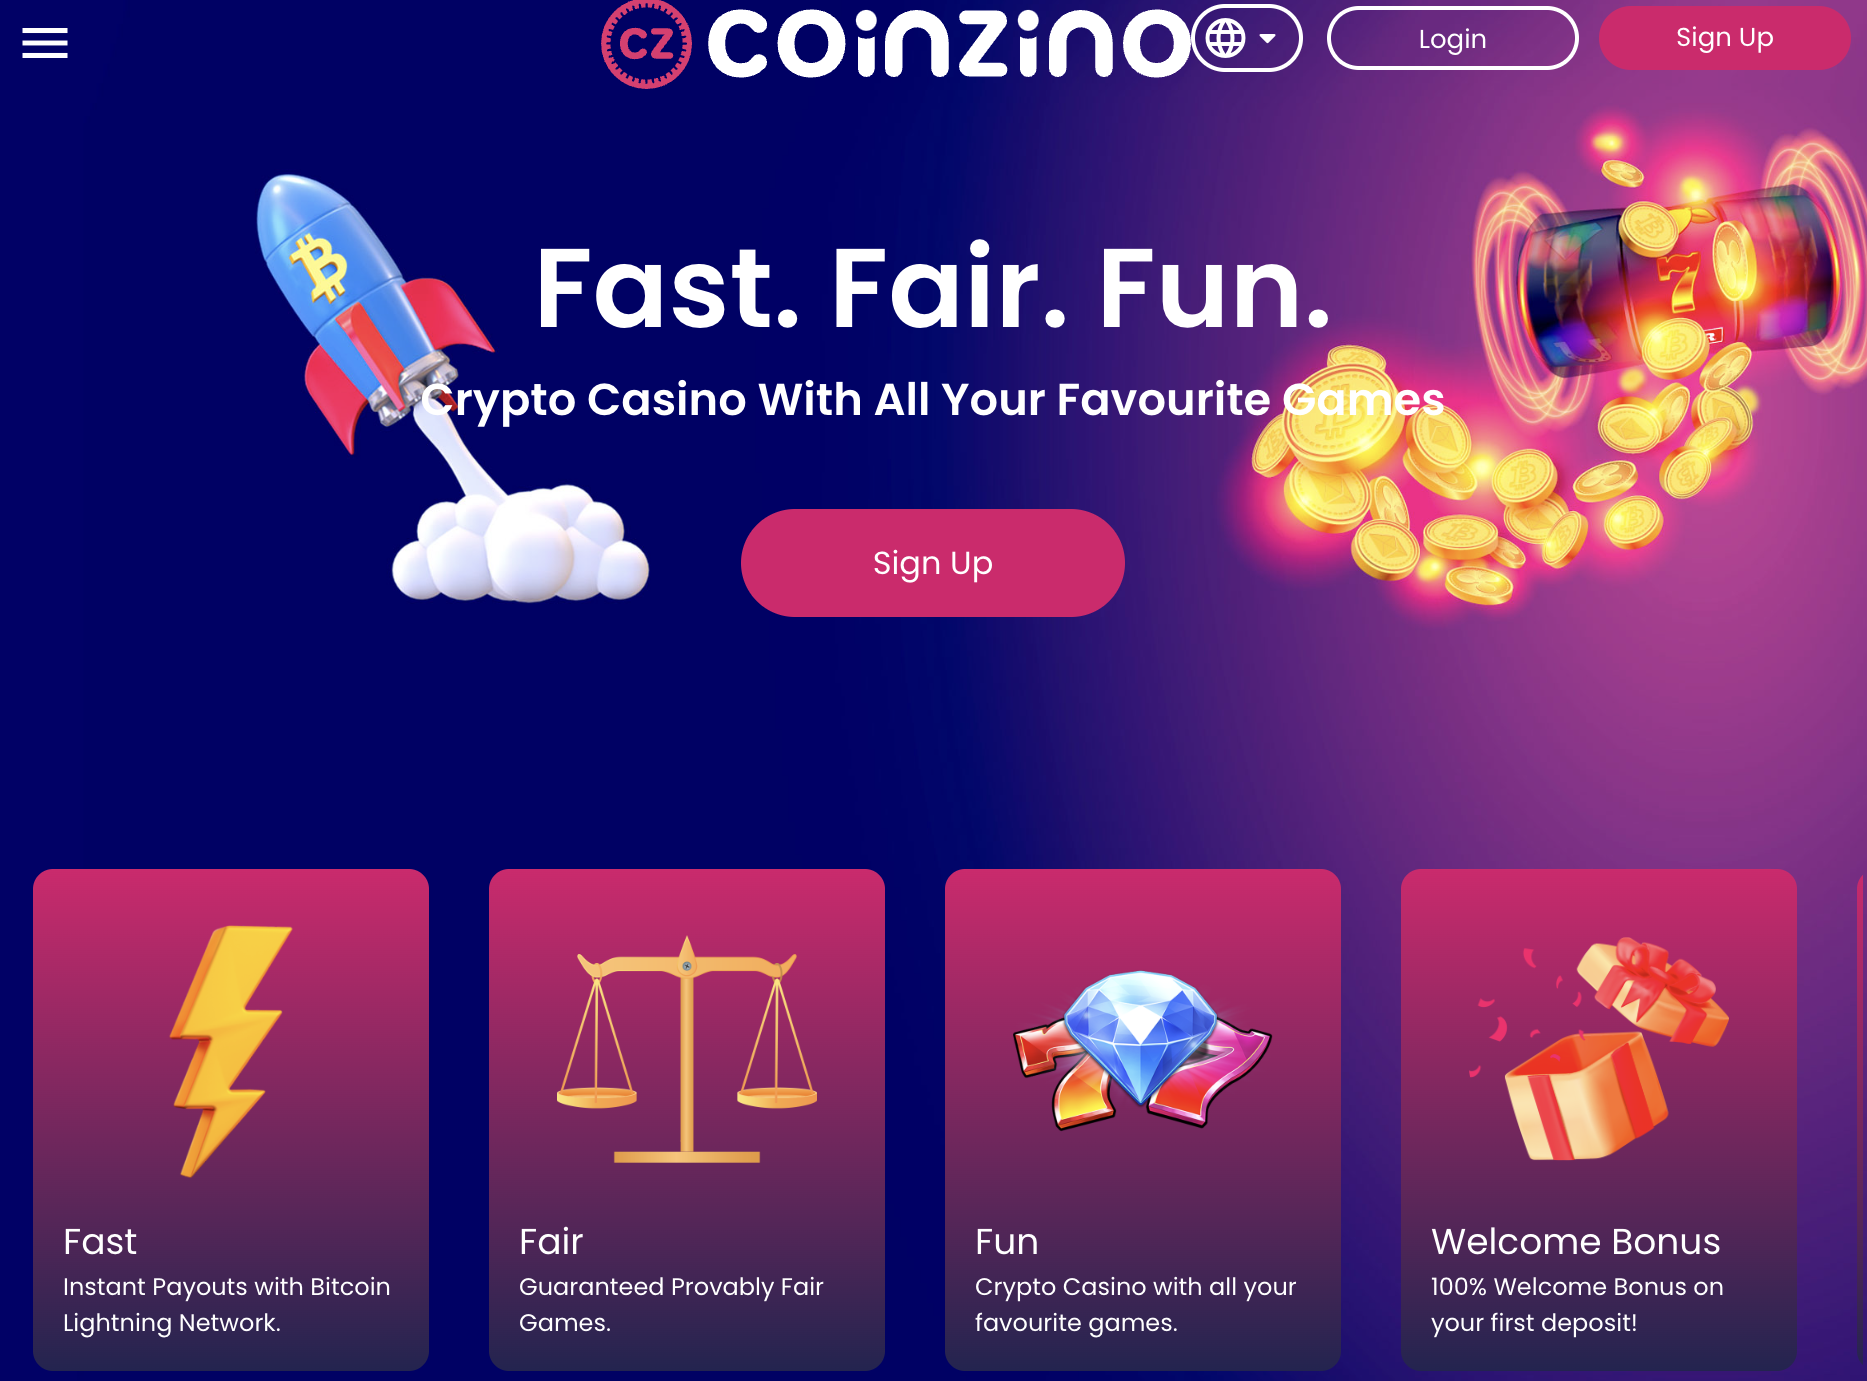 What is Coinzino Casino - At a Glance